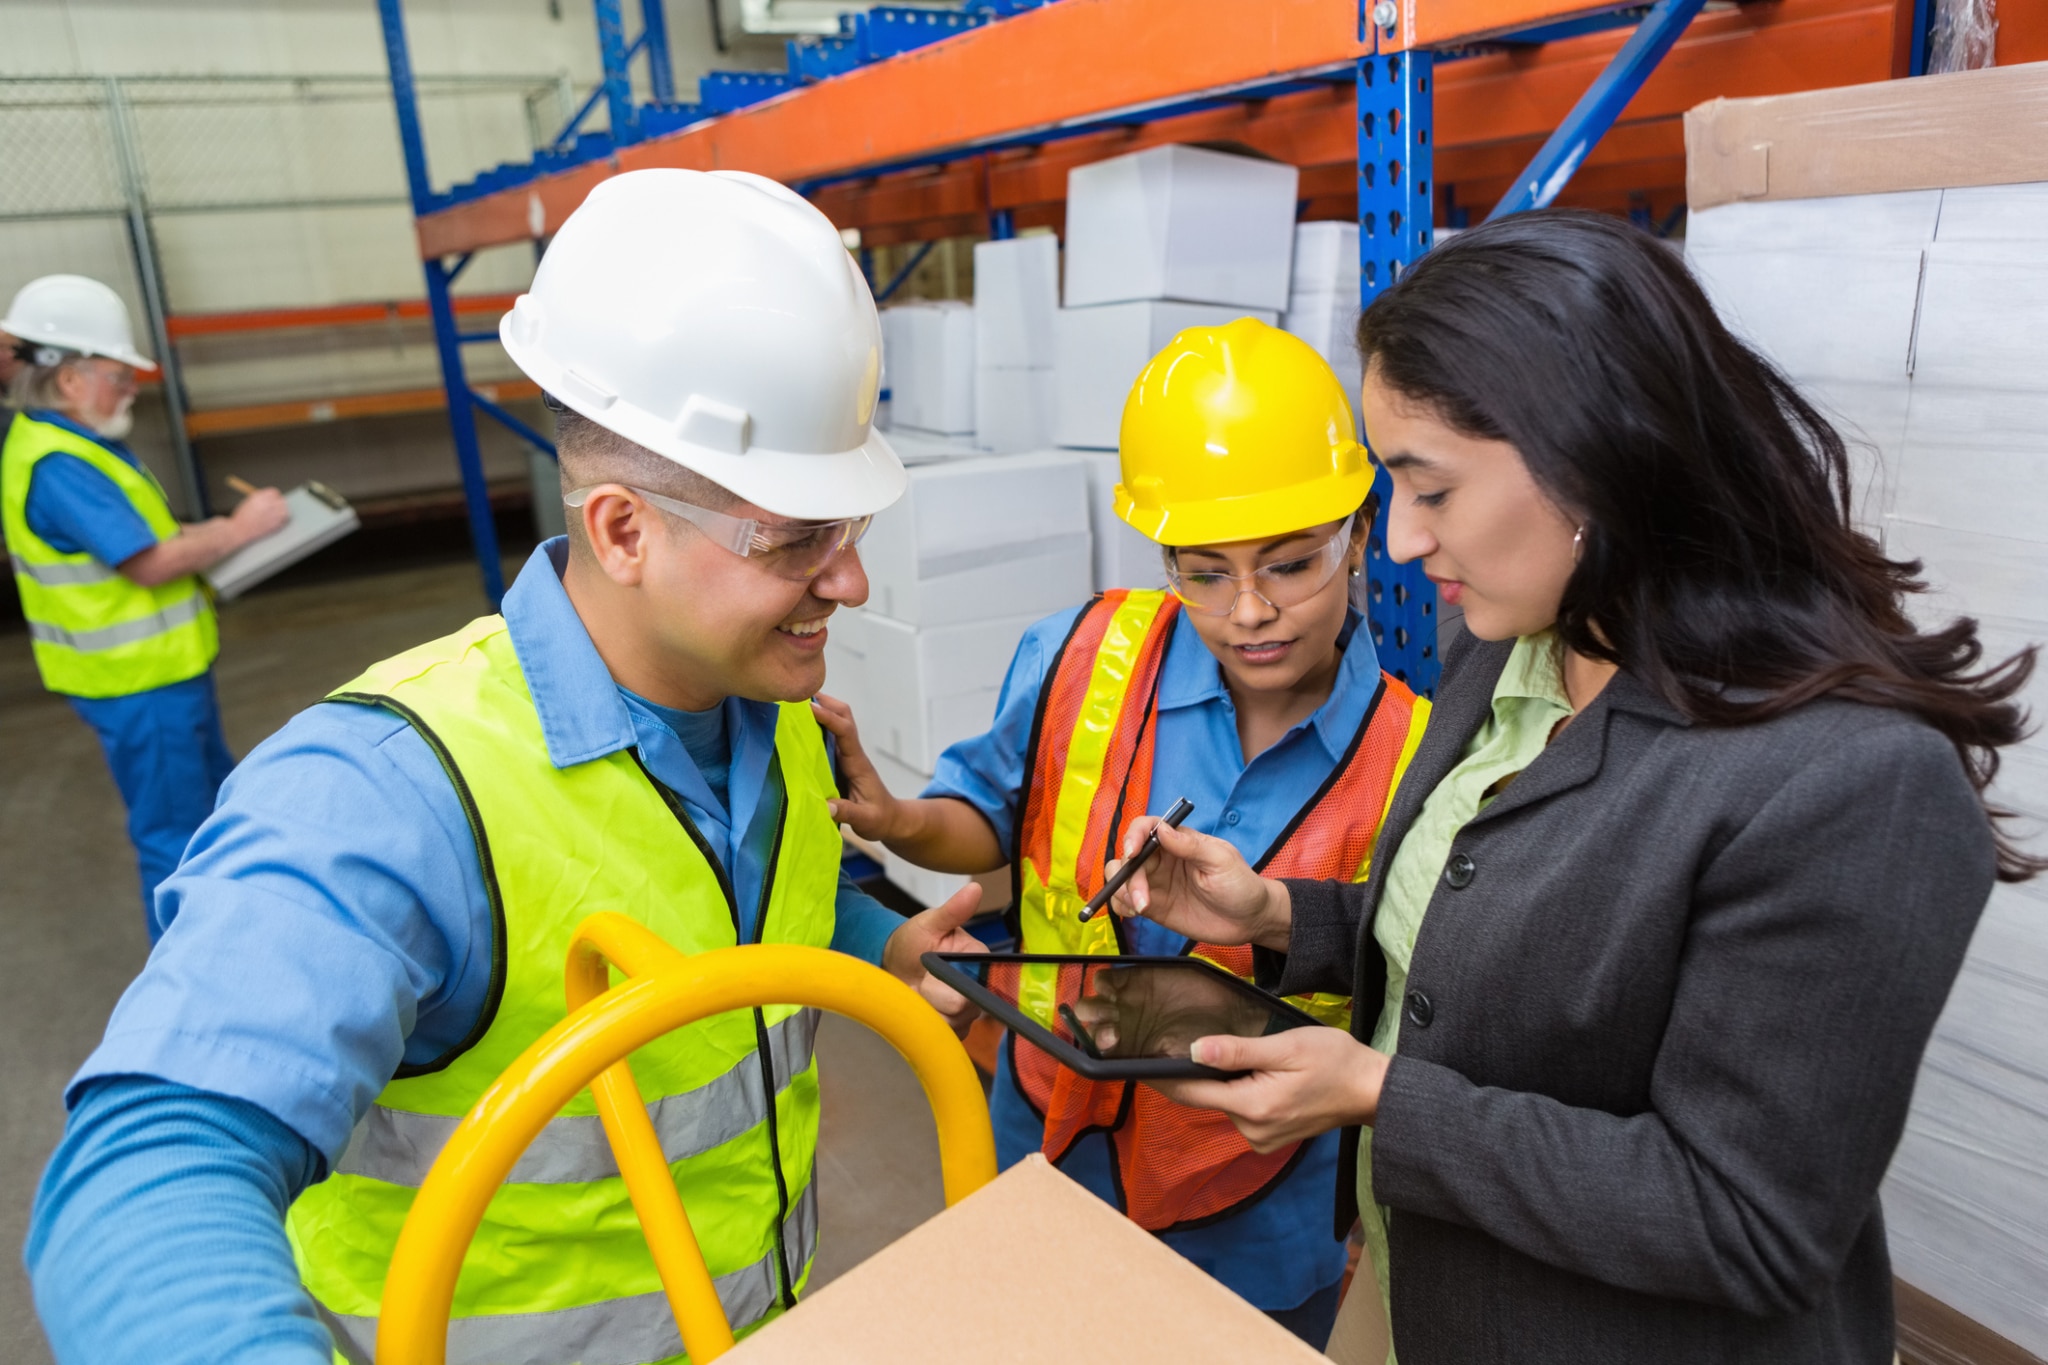 supervisor reveiwing purchase order with workers in warehouse